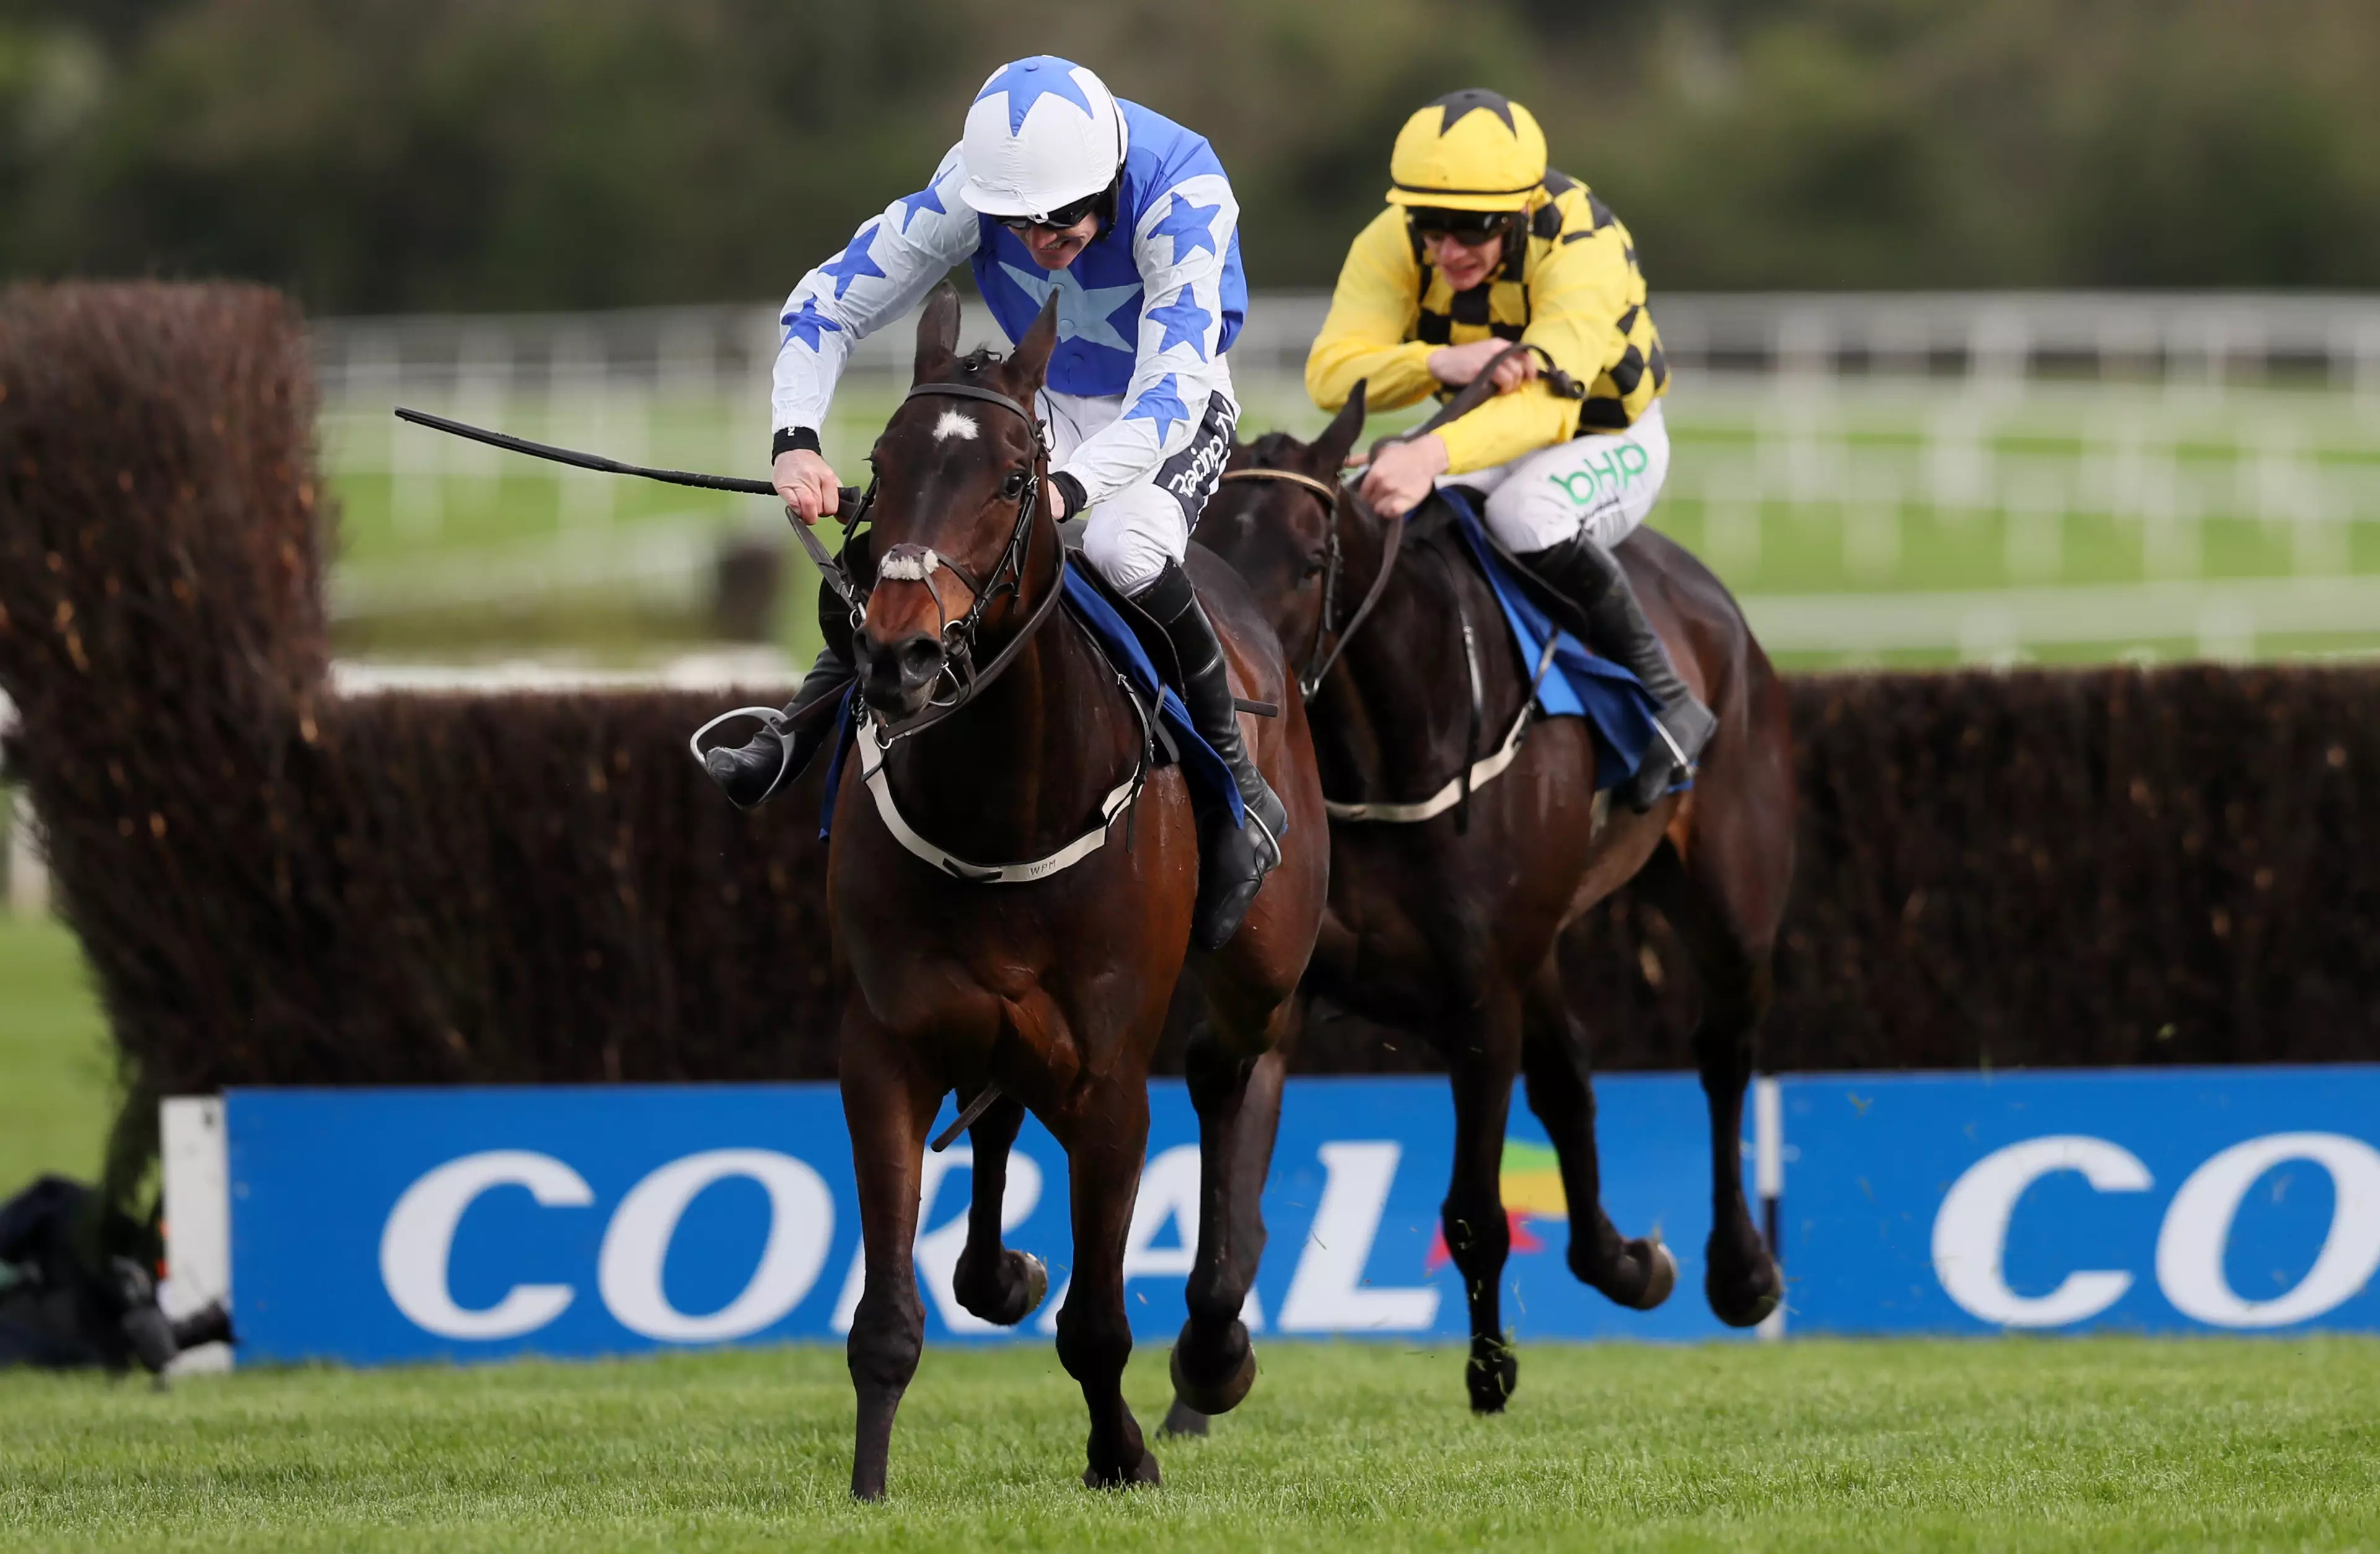 Al Boum Photo and Kemboy go head-to-head in a fiercely contested Ladbrokes Punchestown Gold Cup on Wednesday